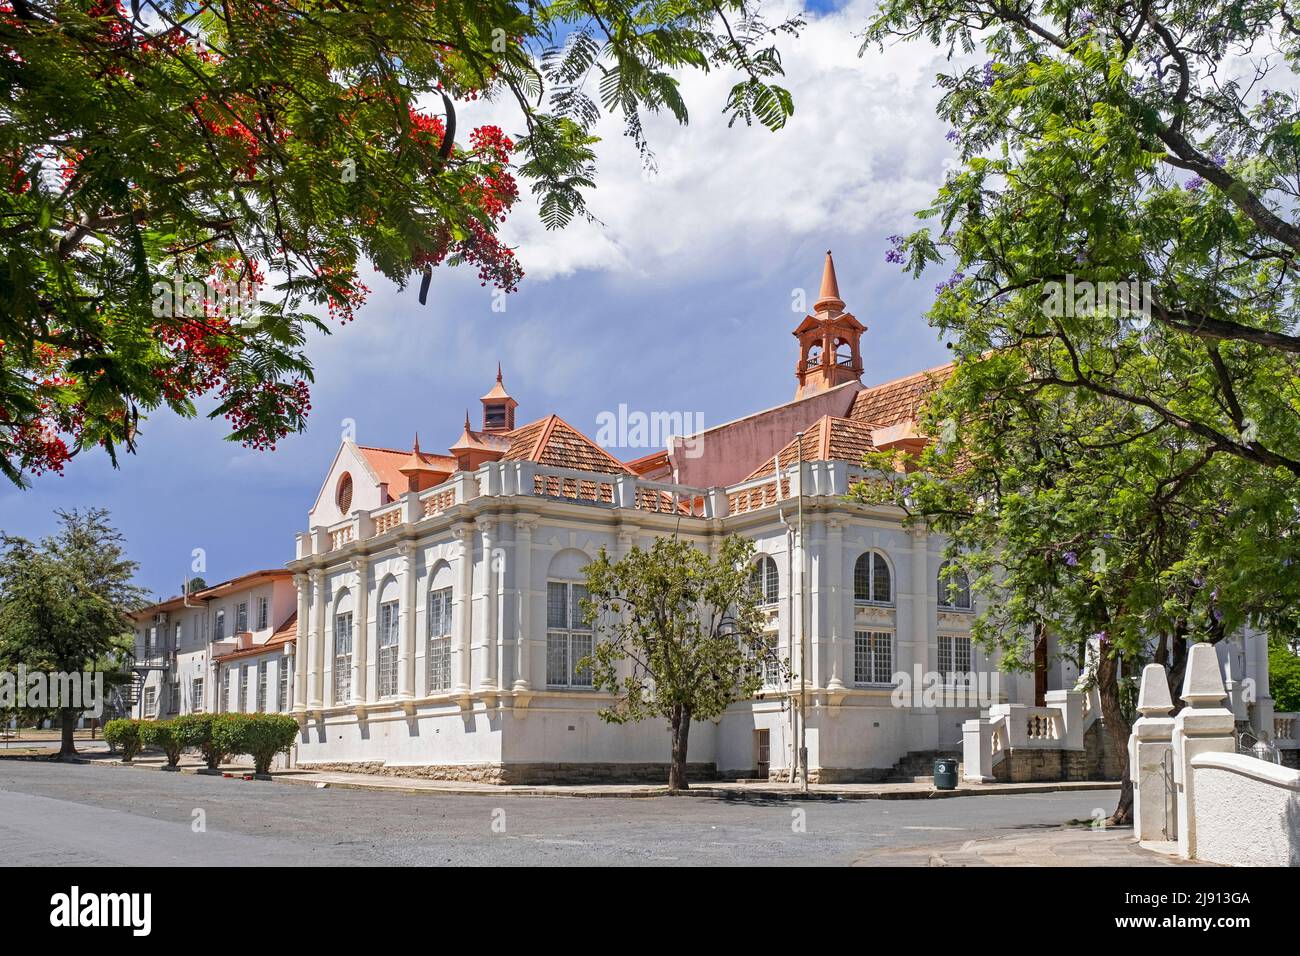 Victoriasaal / Victoria Hall, city hall in Flemish Renaissance style in the town Graaff-Reinet, Eastern Cape, South Africa Stock Photo